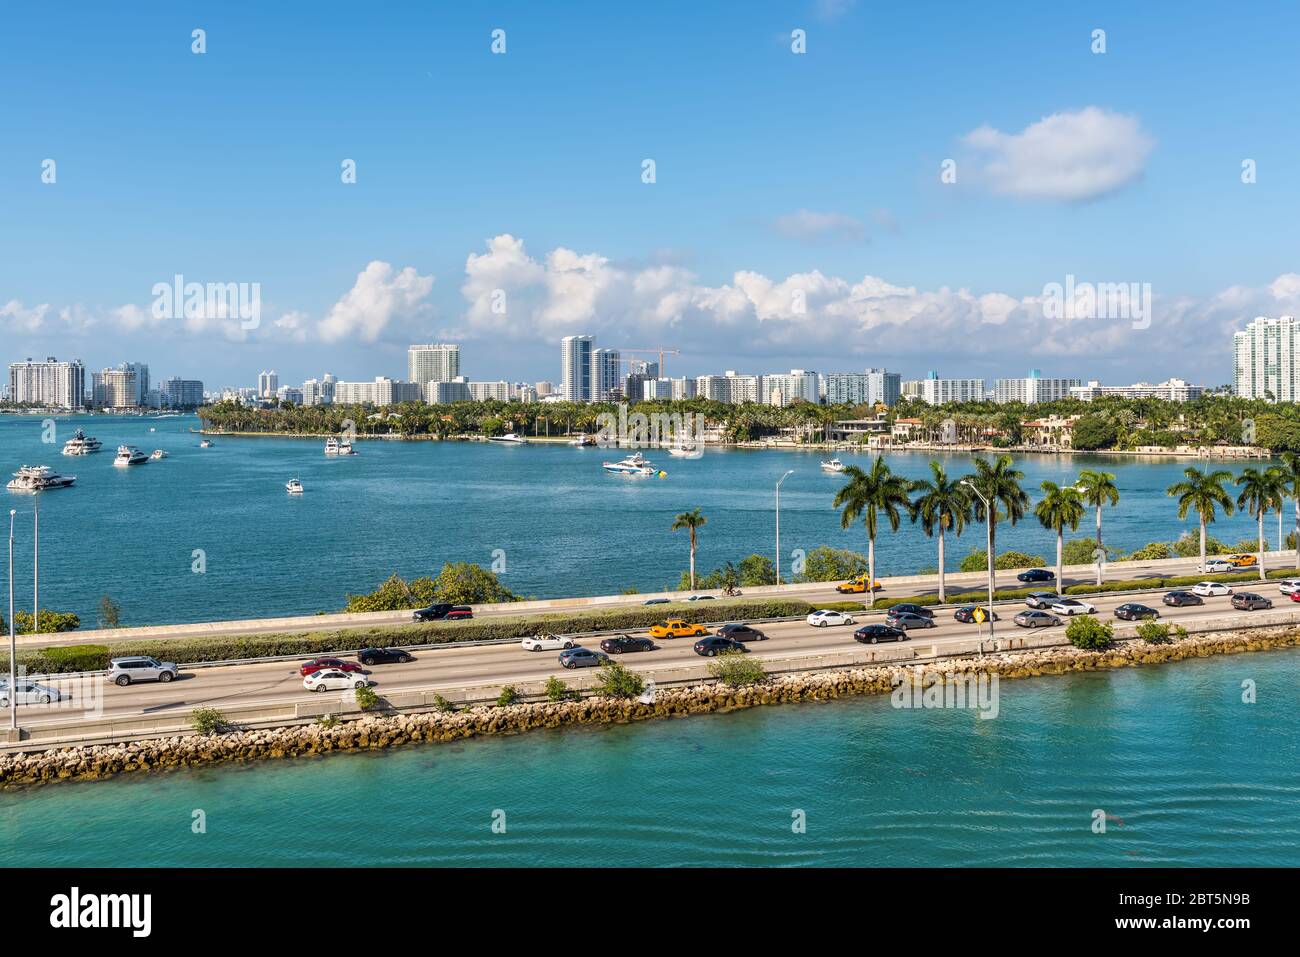 Miami, FL, United States - April 28, 2019: Causeway from downtown to Miami beach, Biscayne Bay and Star Island in Miami, Florida, United States of Ame Stock Photo